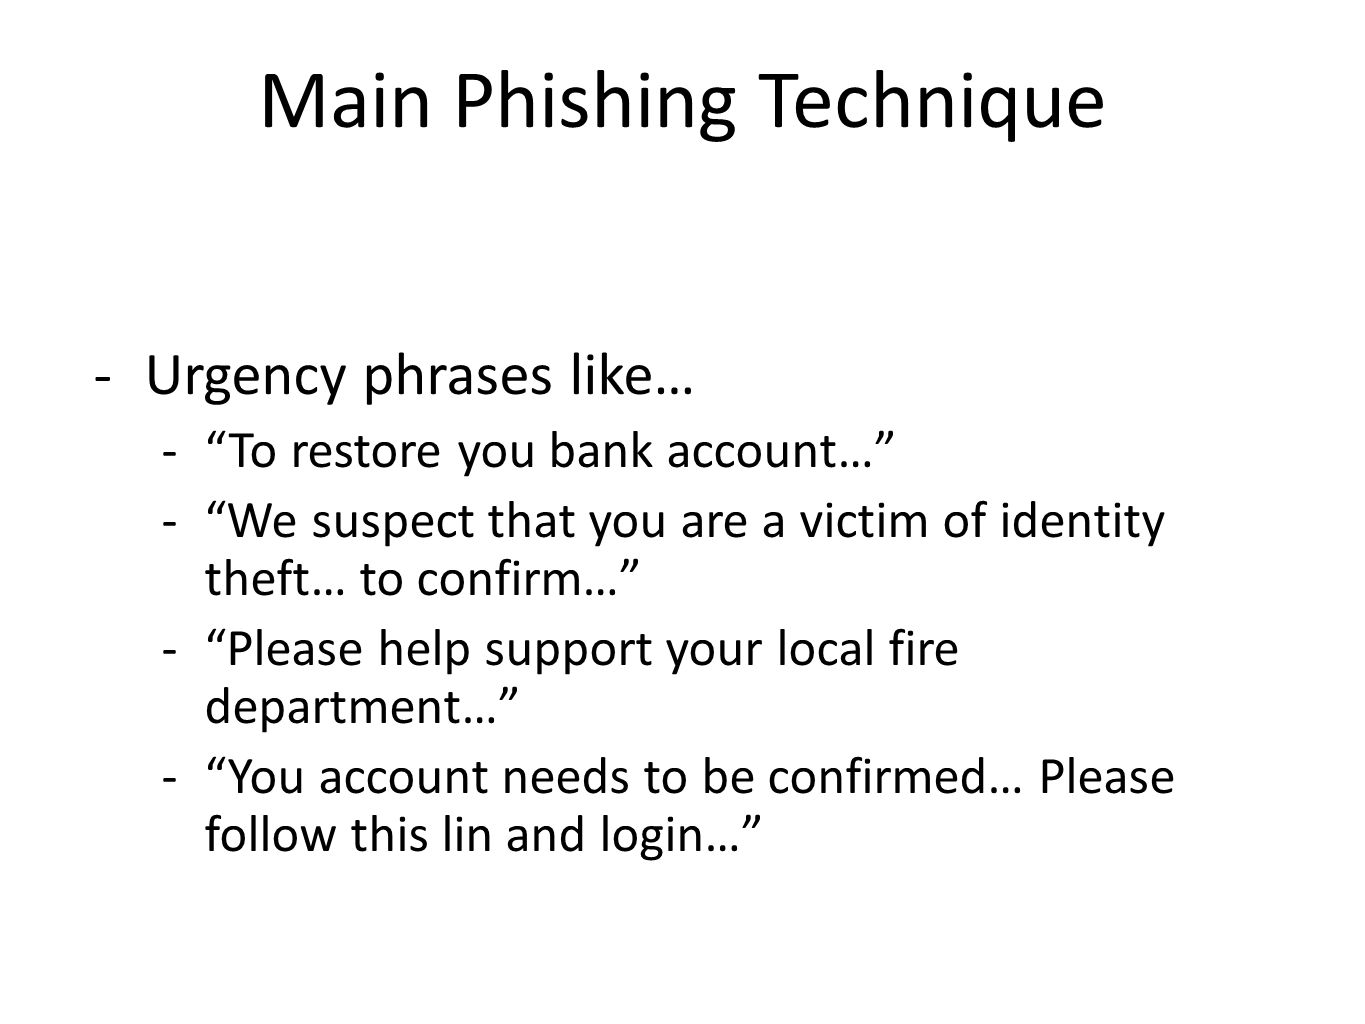 Main Phishing Technique -Urgency phrases like… - To restore you bank account… - We suspect that you are a victim of identity theft… to confirm… - Please help support your local fire department… - You account needs to be confirmed… Please follow this lin and login…